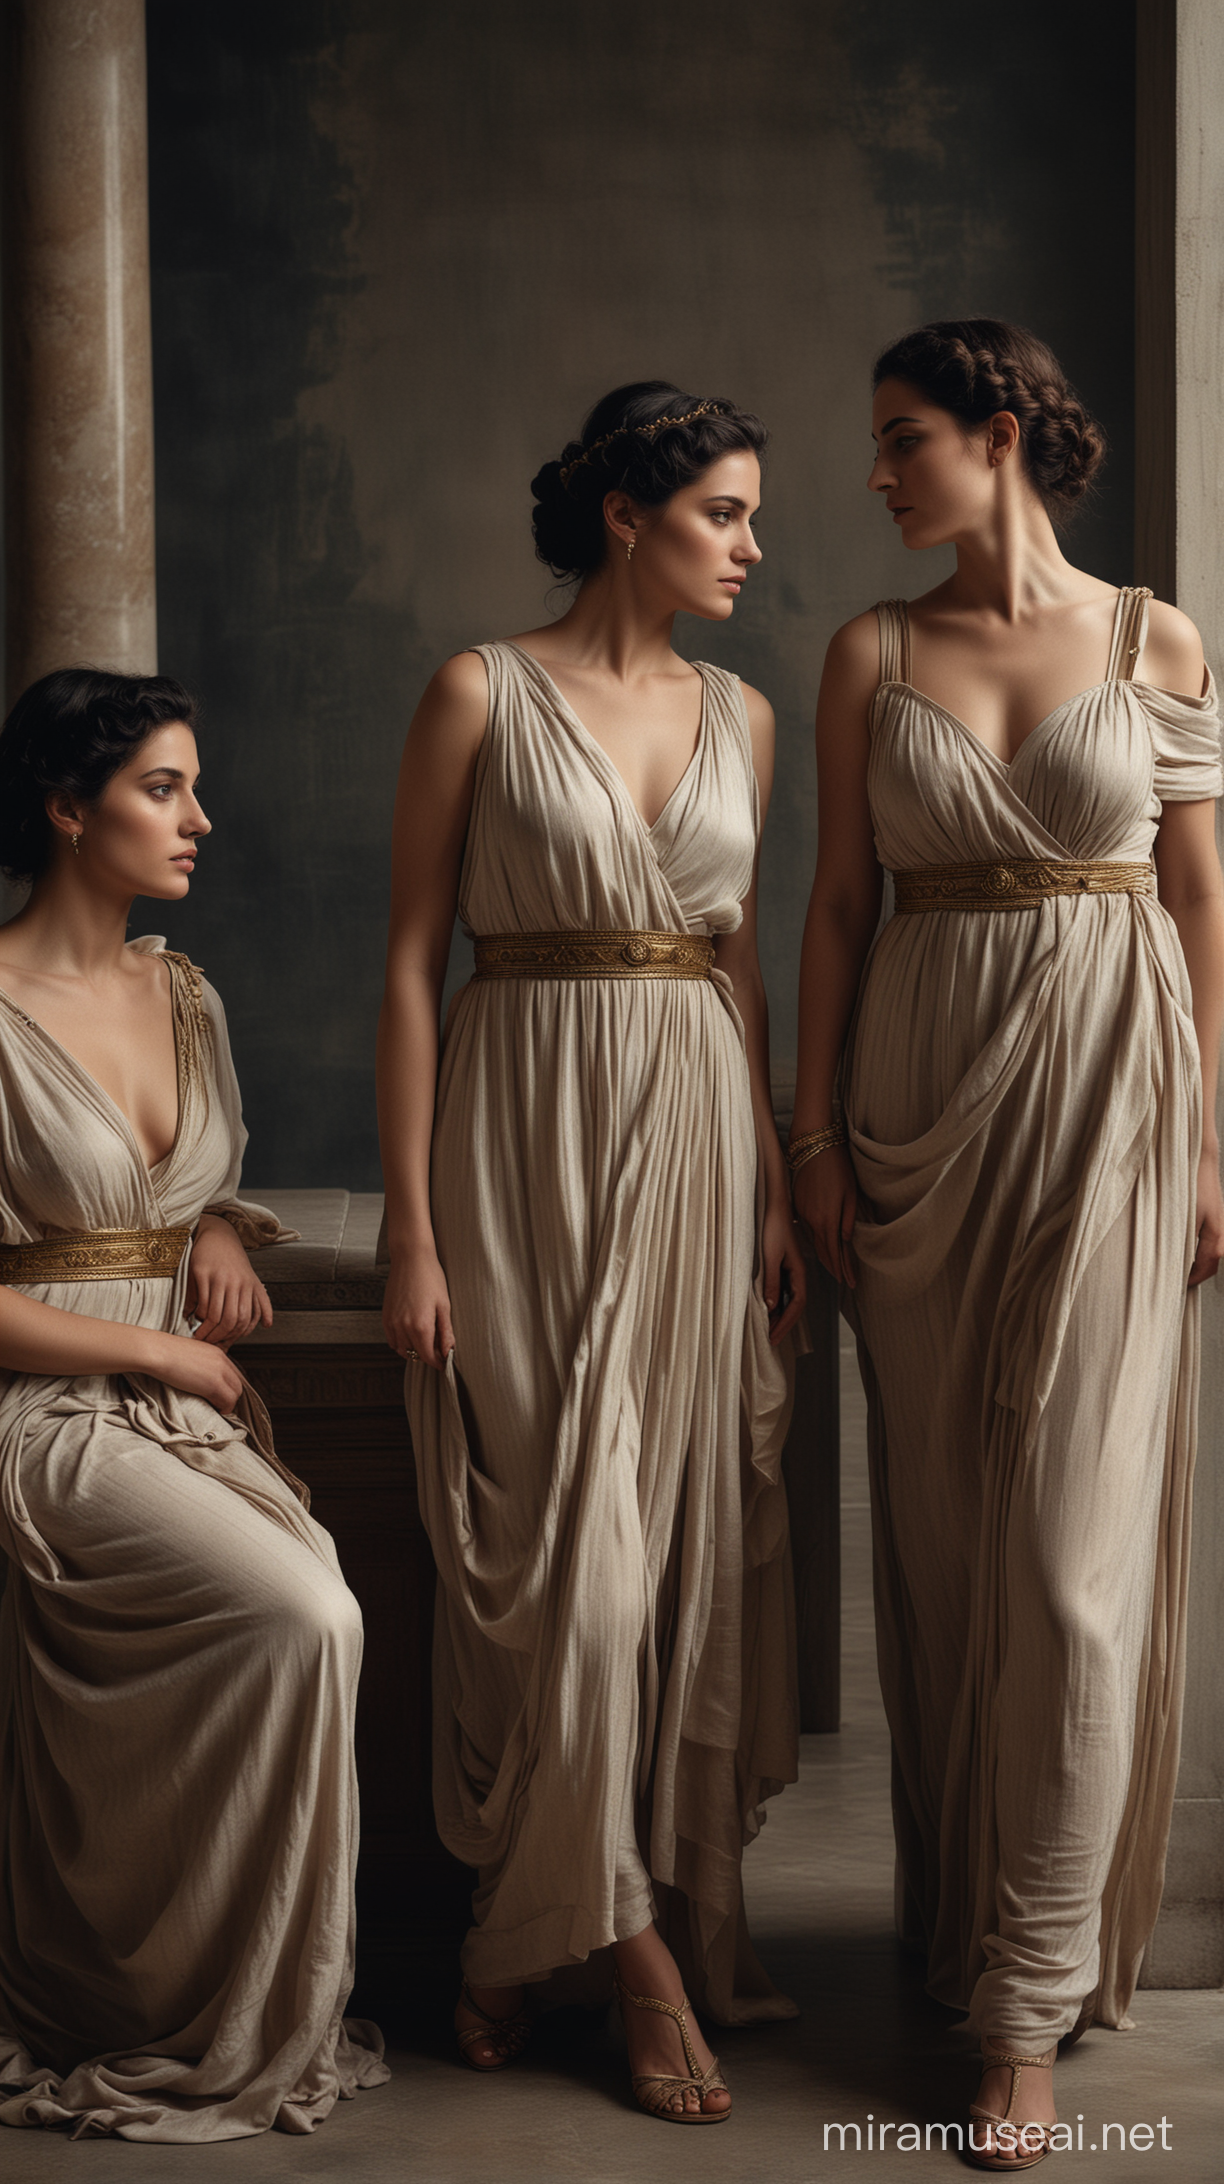 Three (((women))) dressed in classical attire from ancient Rome, exuding an air of sophistication and sensuality against a (subtly moody backdrop), embodying a timeless sense of elegance and sex appeal